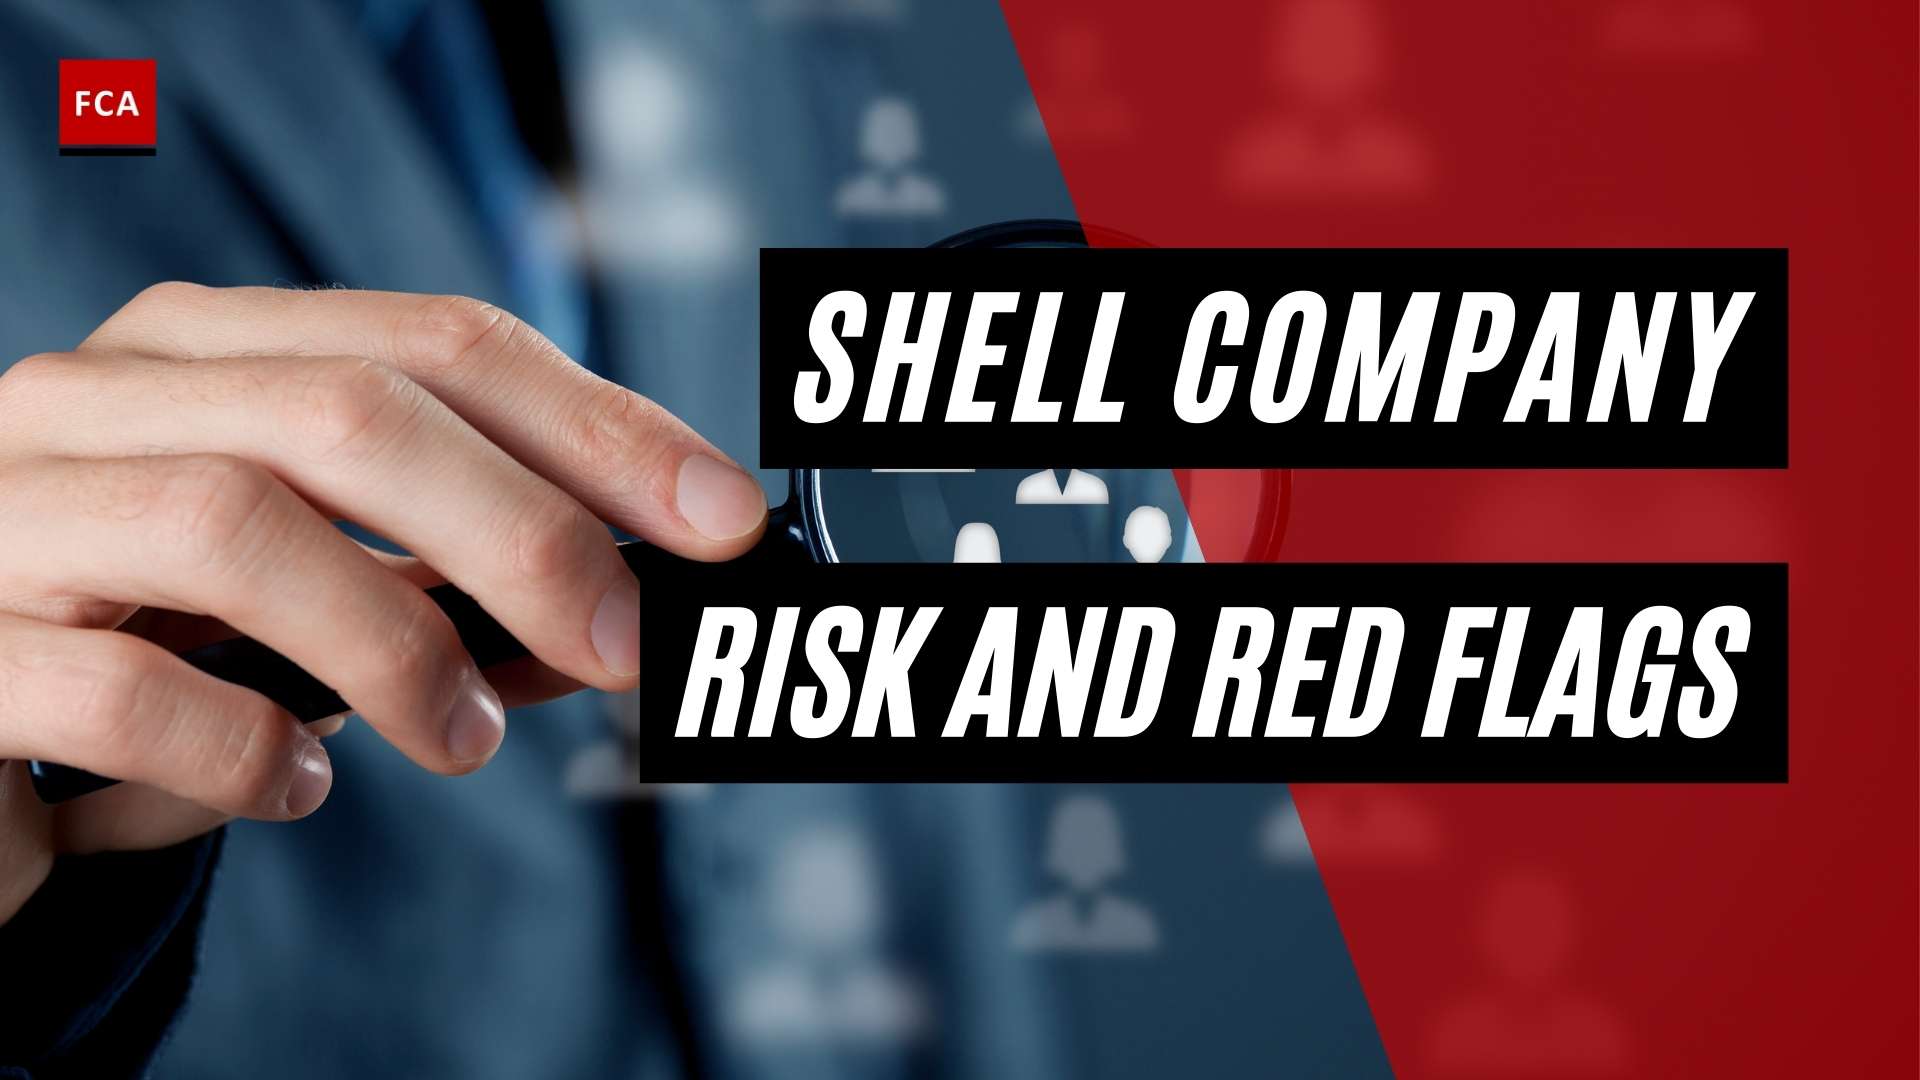 Shell Company Risk And Red Flags - Featured Image